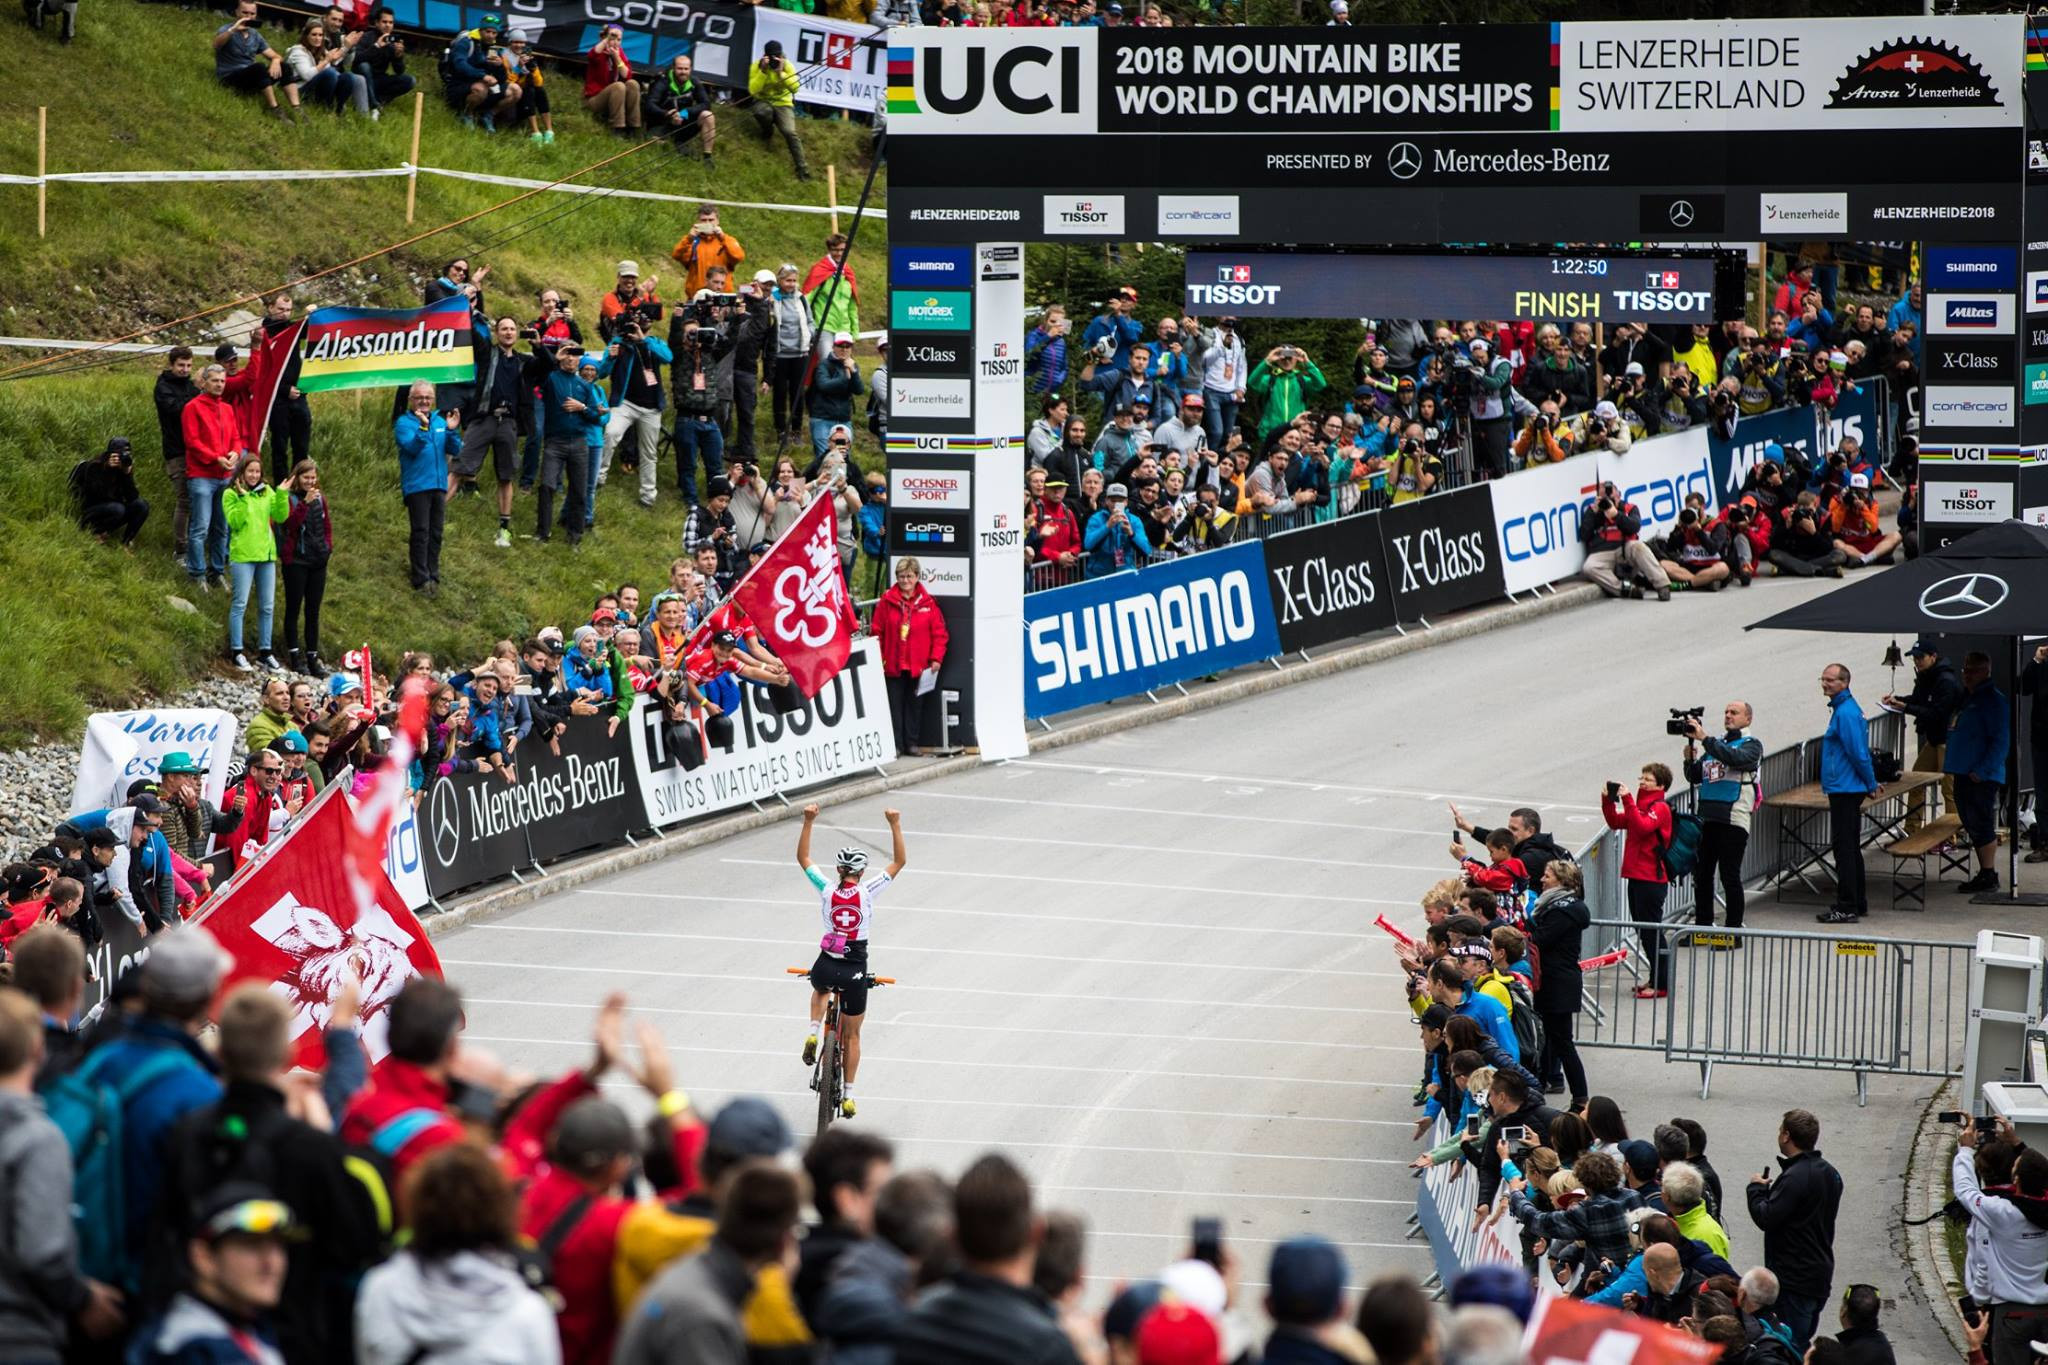 Keller and Hatherly strike cross-country under-23 gold at UCI Mountain Bike World Championships